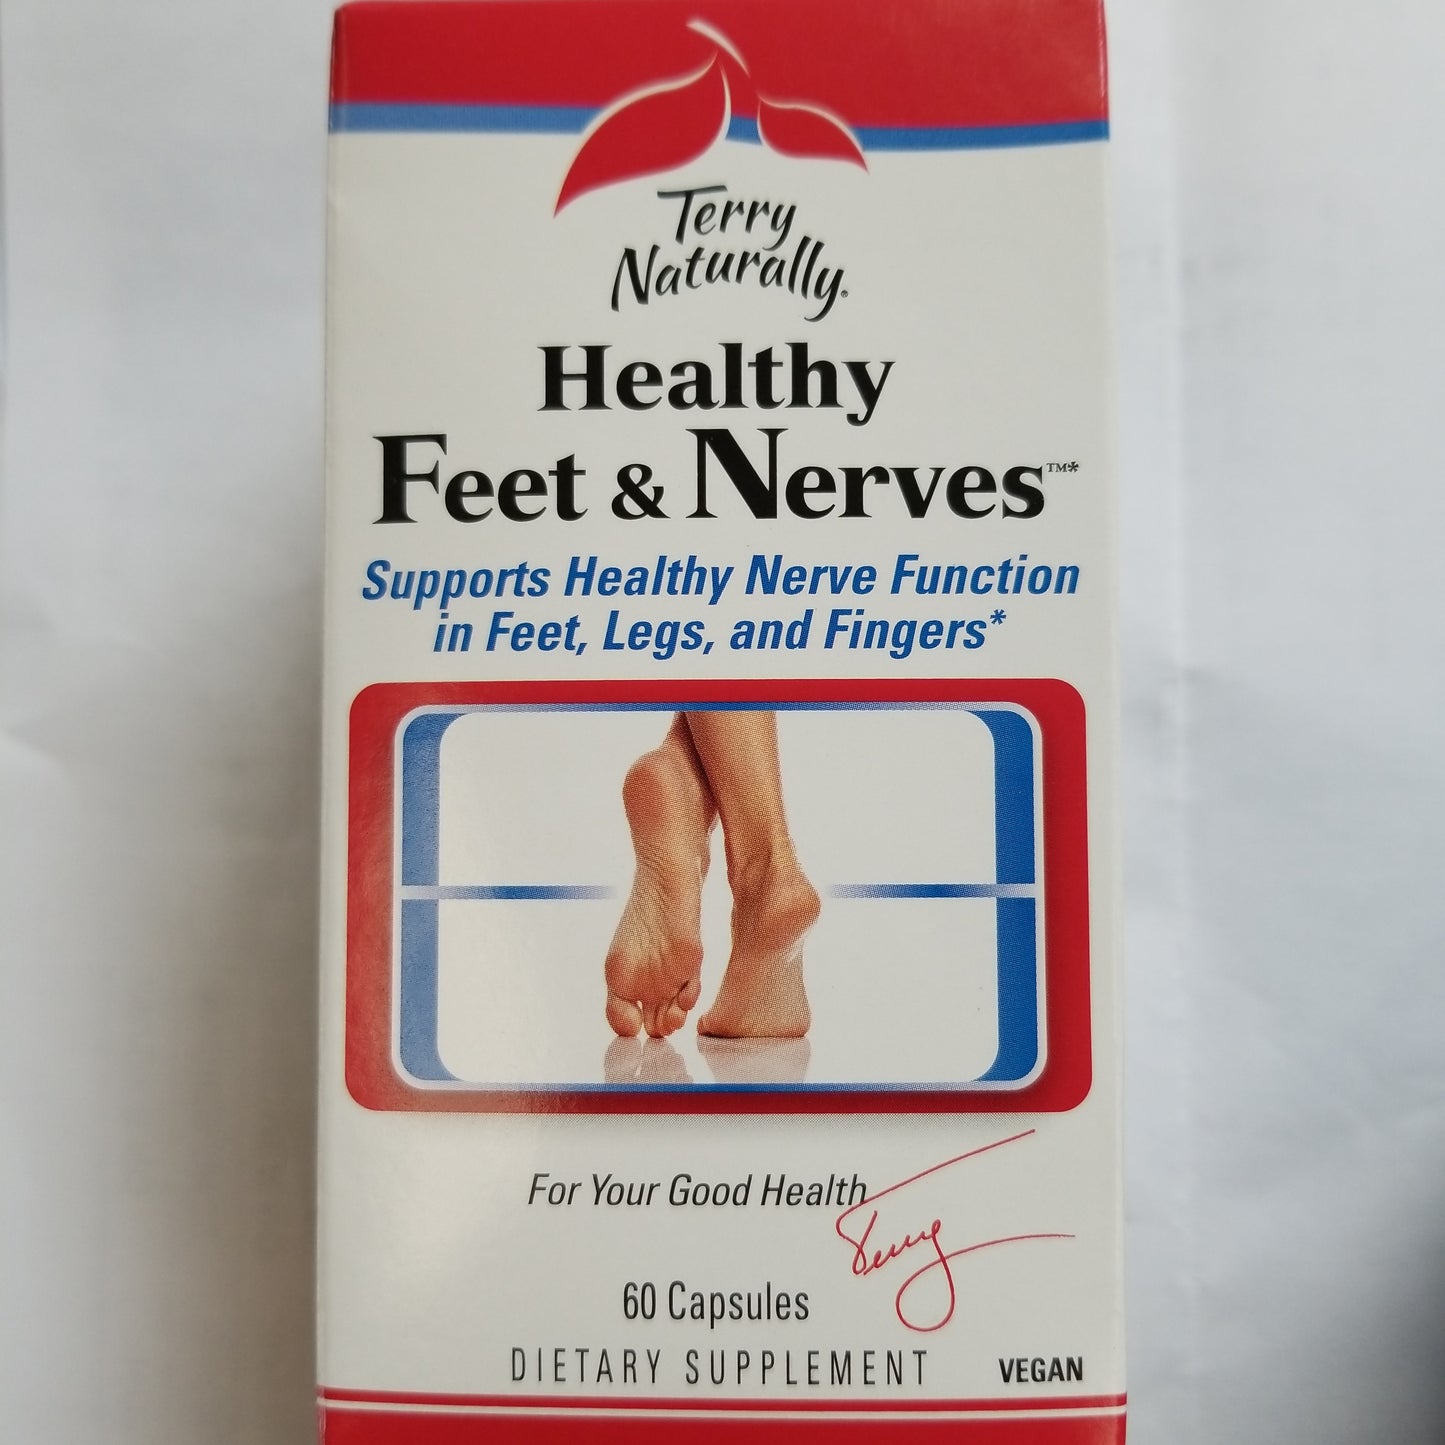 Terry naturally healthy feet and nerves